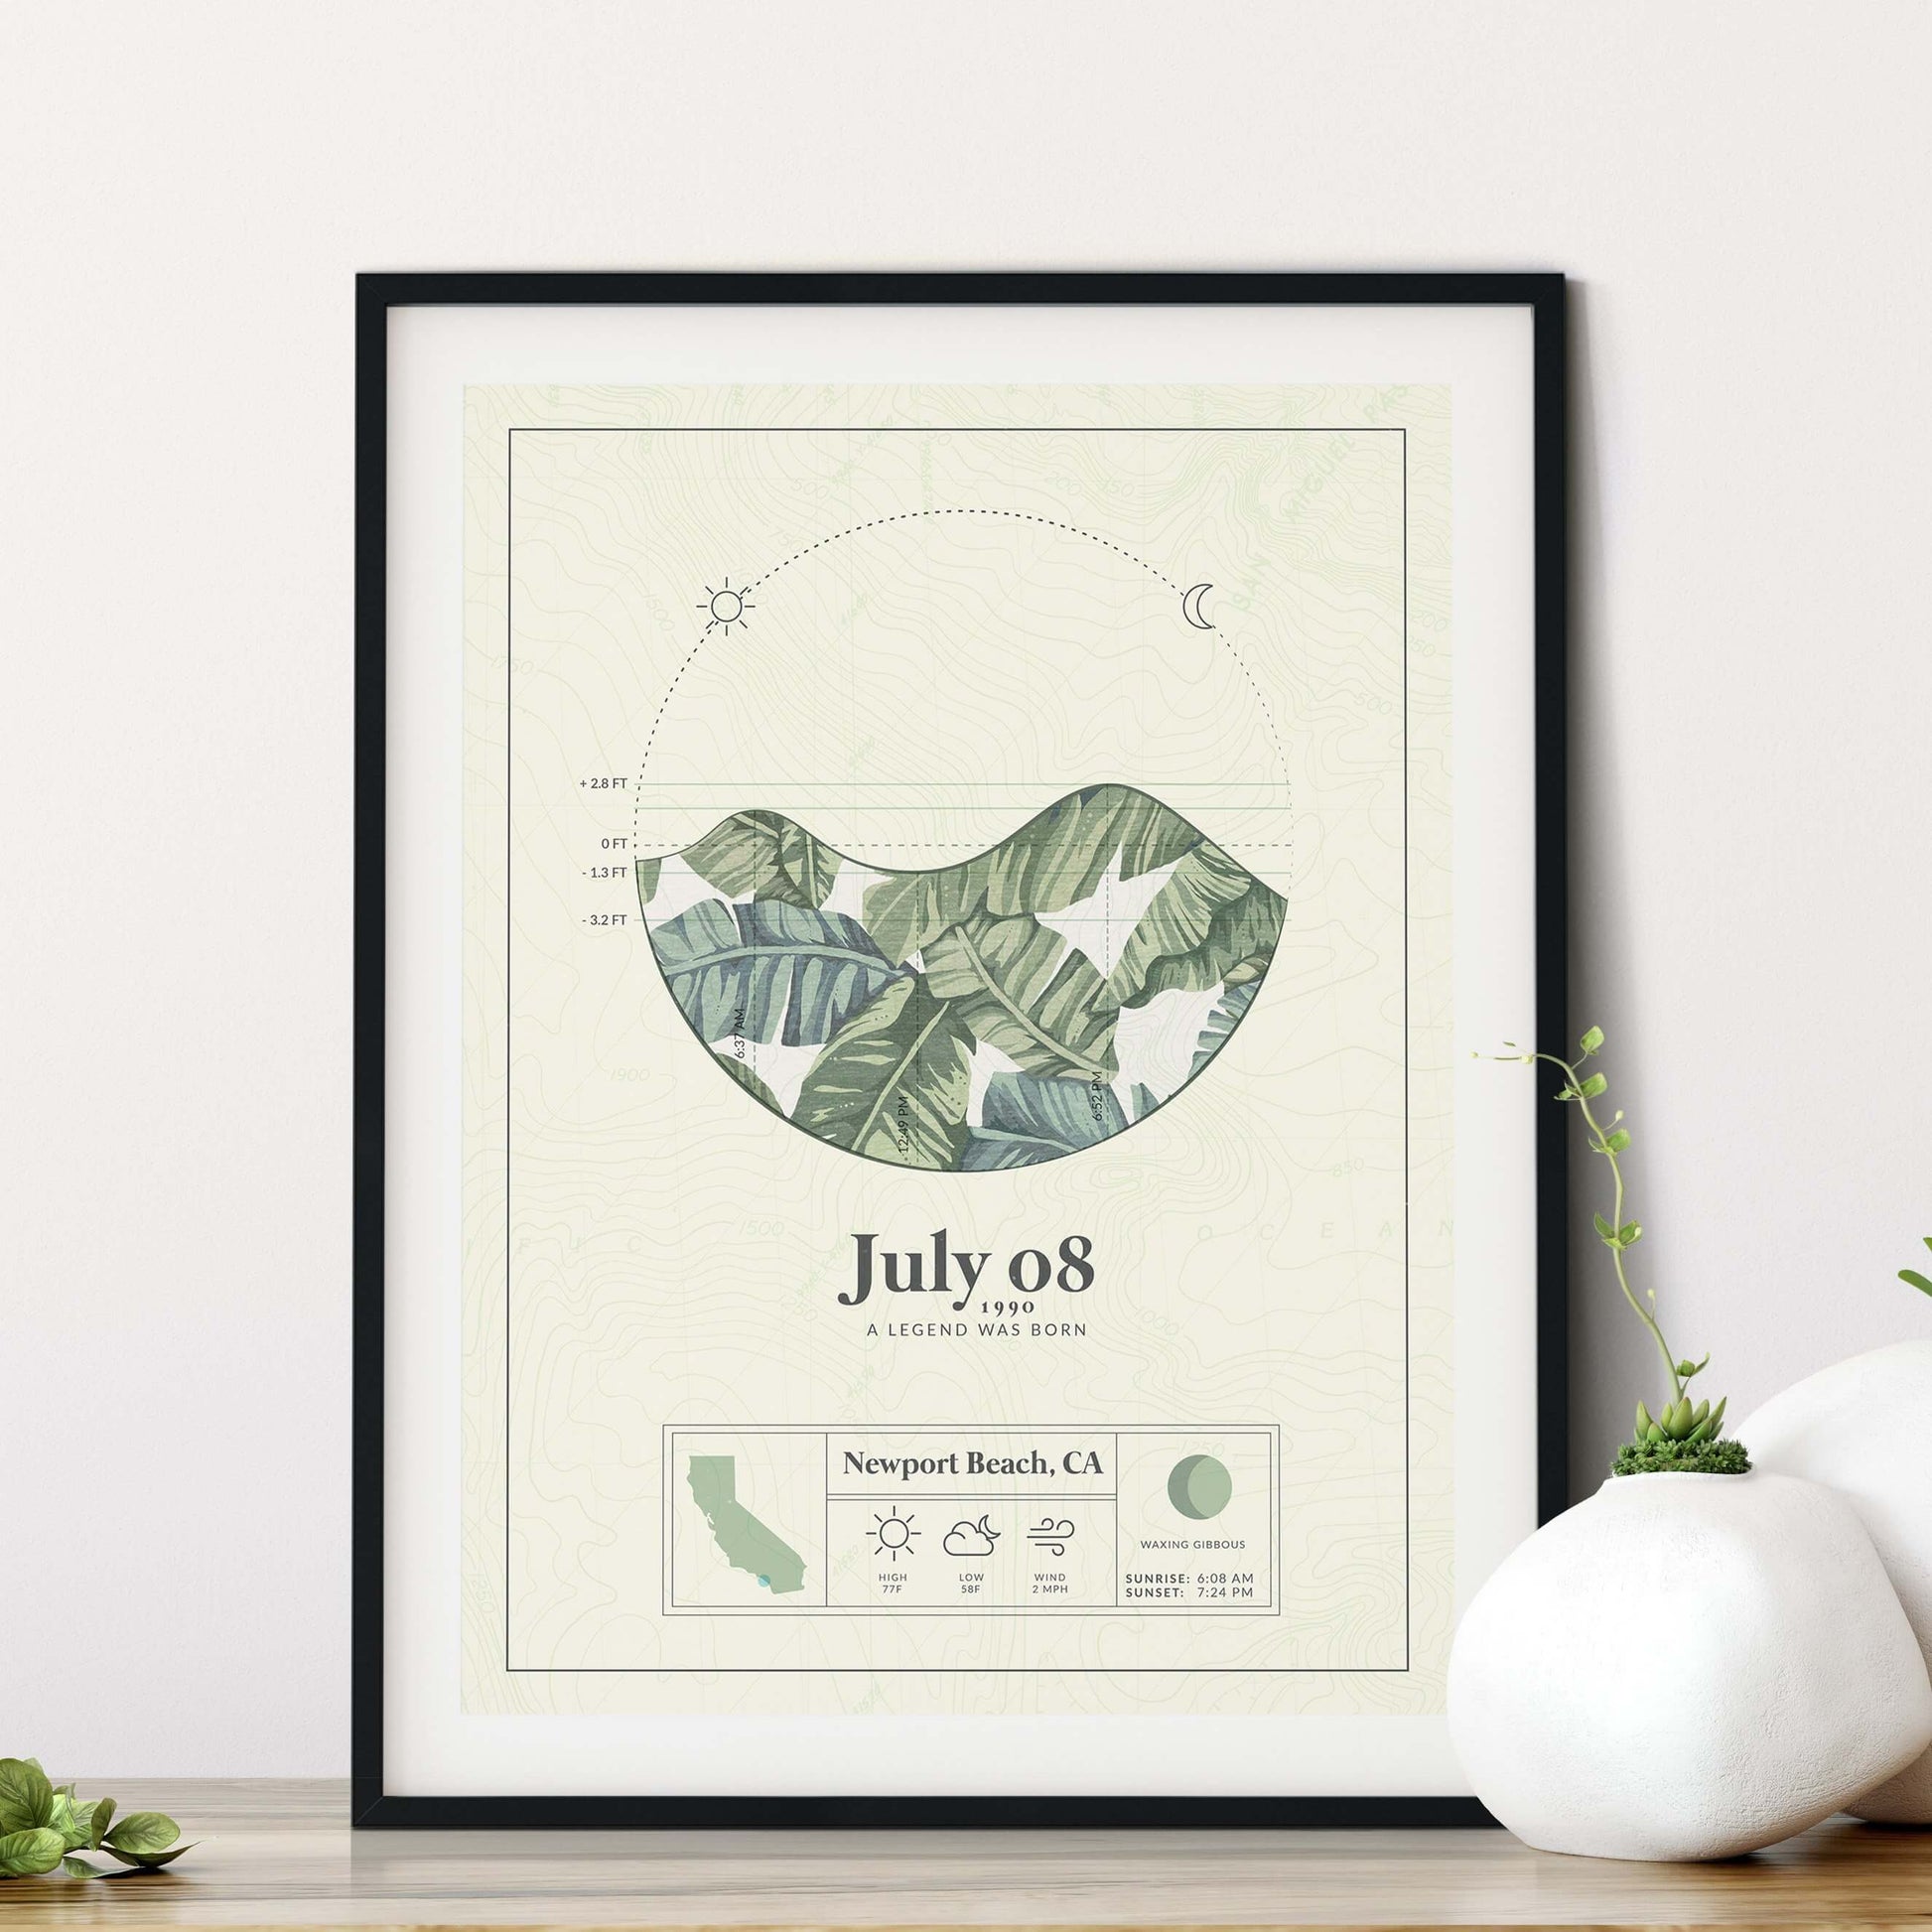 black framed picture of the personalized tide poster by salt atlas in the island green color in a home setting. These are custom posters showing the tide, weather, and moon phase for a special day, like an anniversary or birthday.